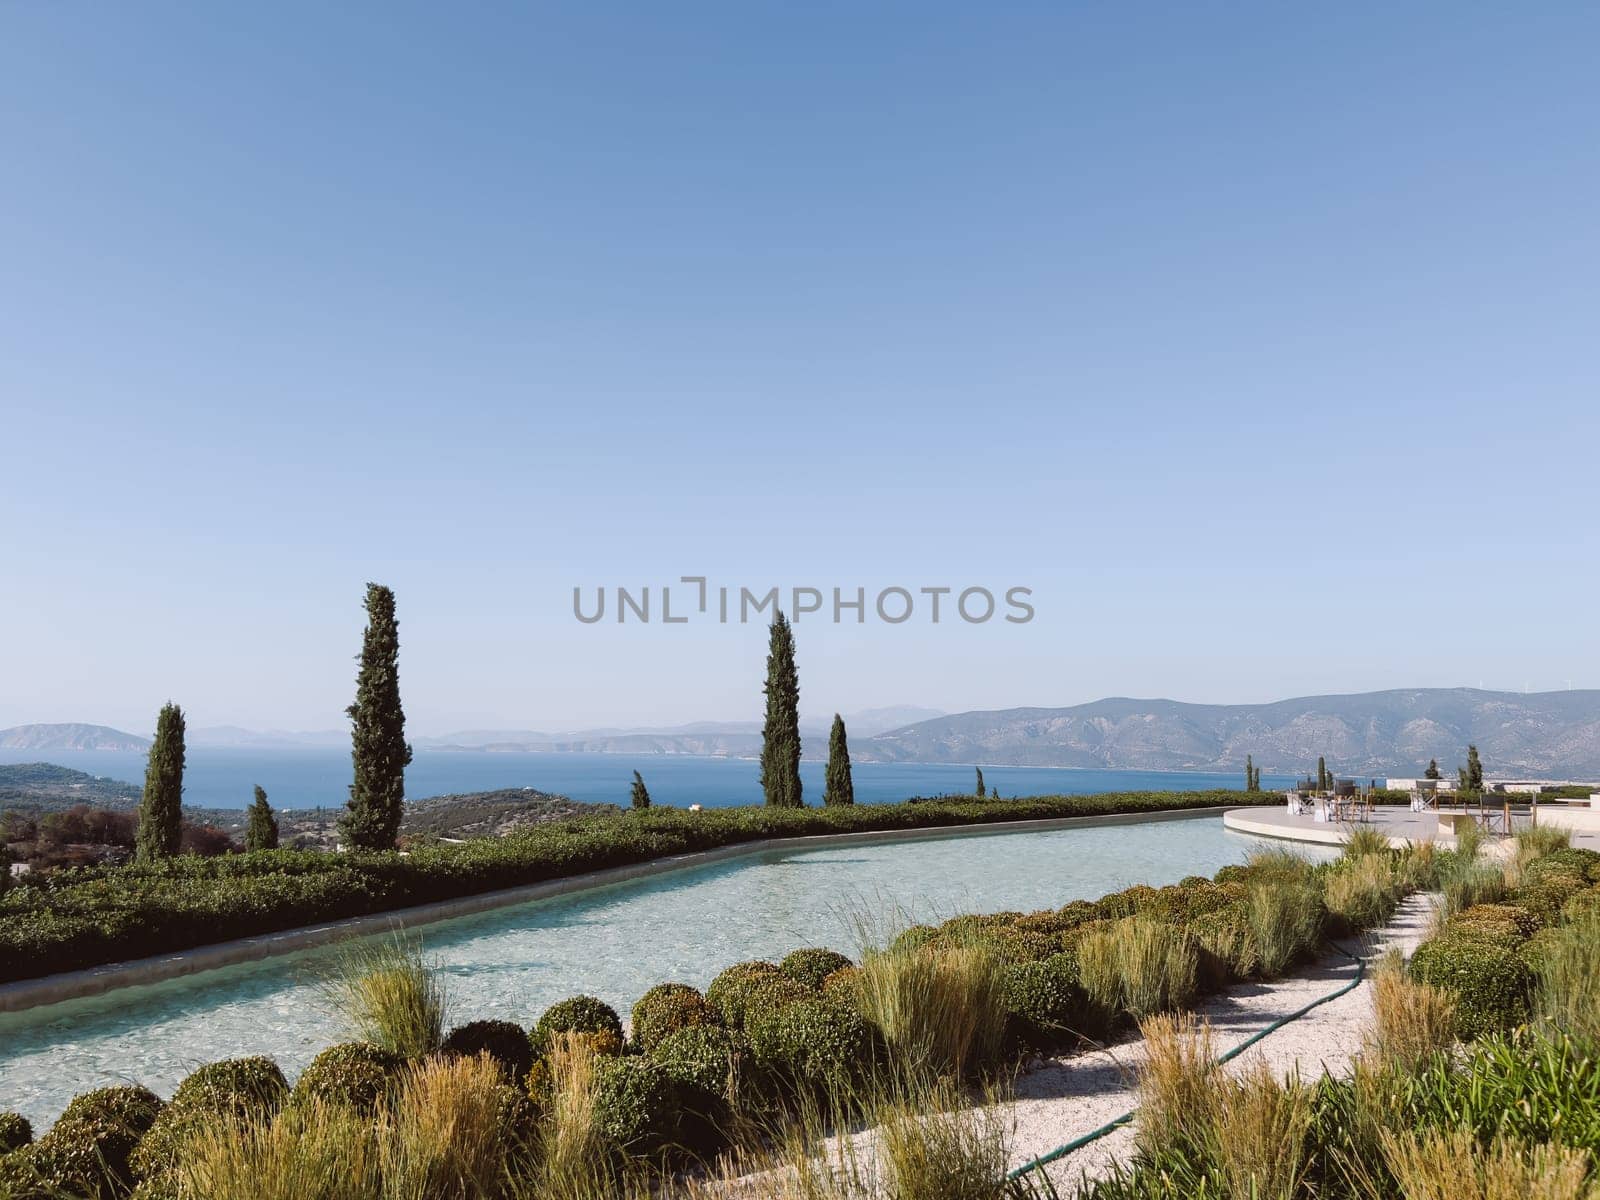 Long pool over the sea against the backdrop of mountains. Hotel Amanzoe, Greece by Nadtochiy